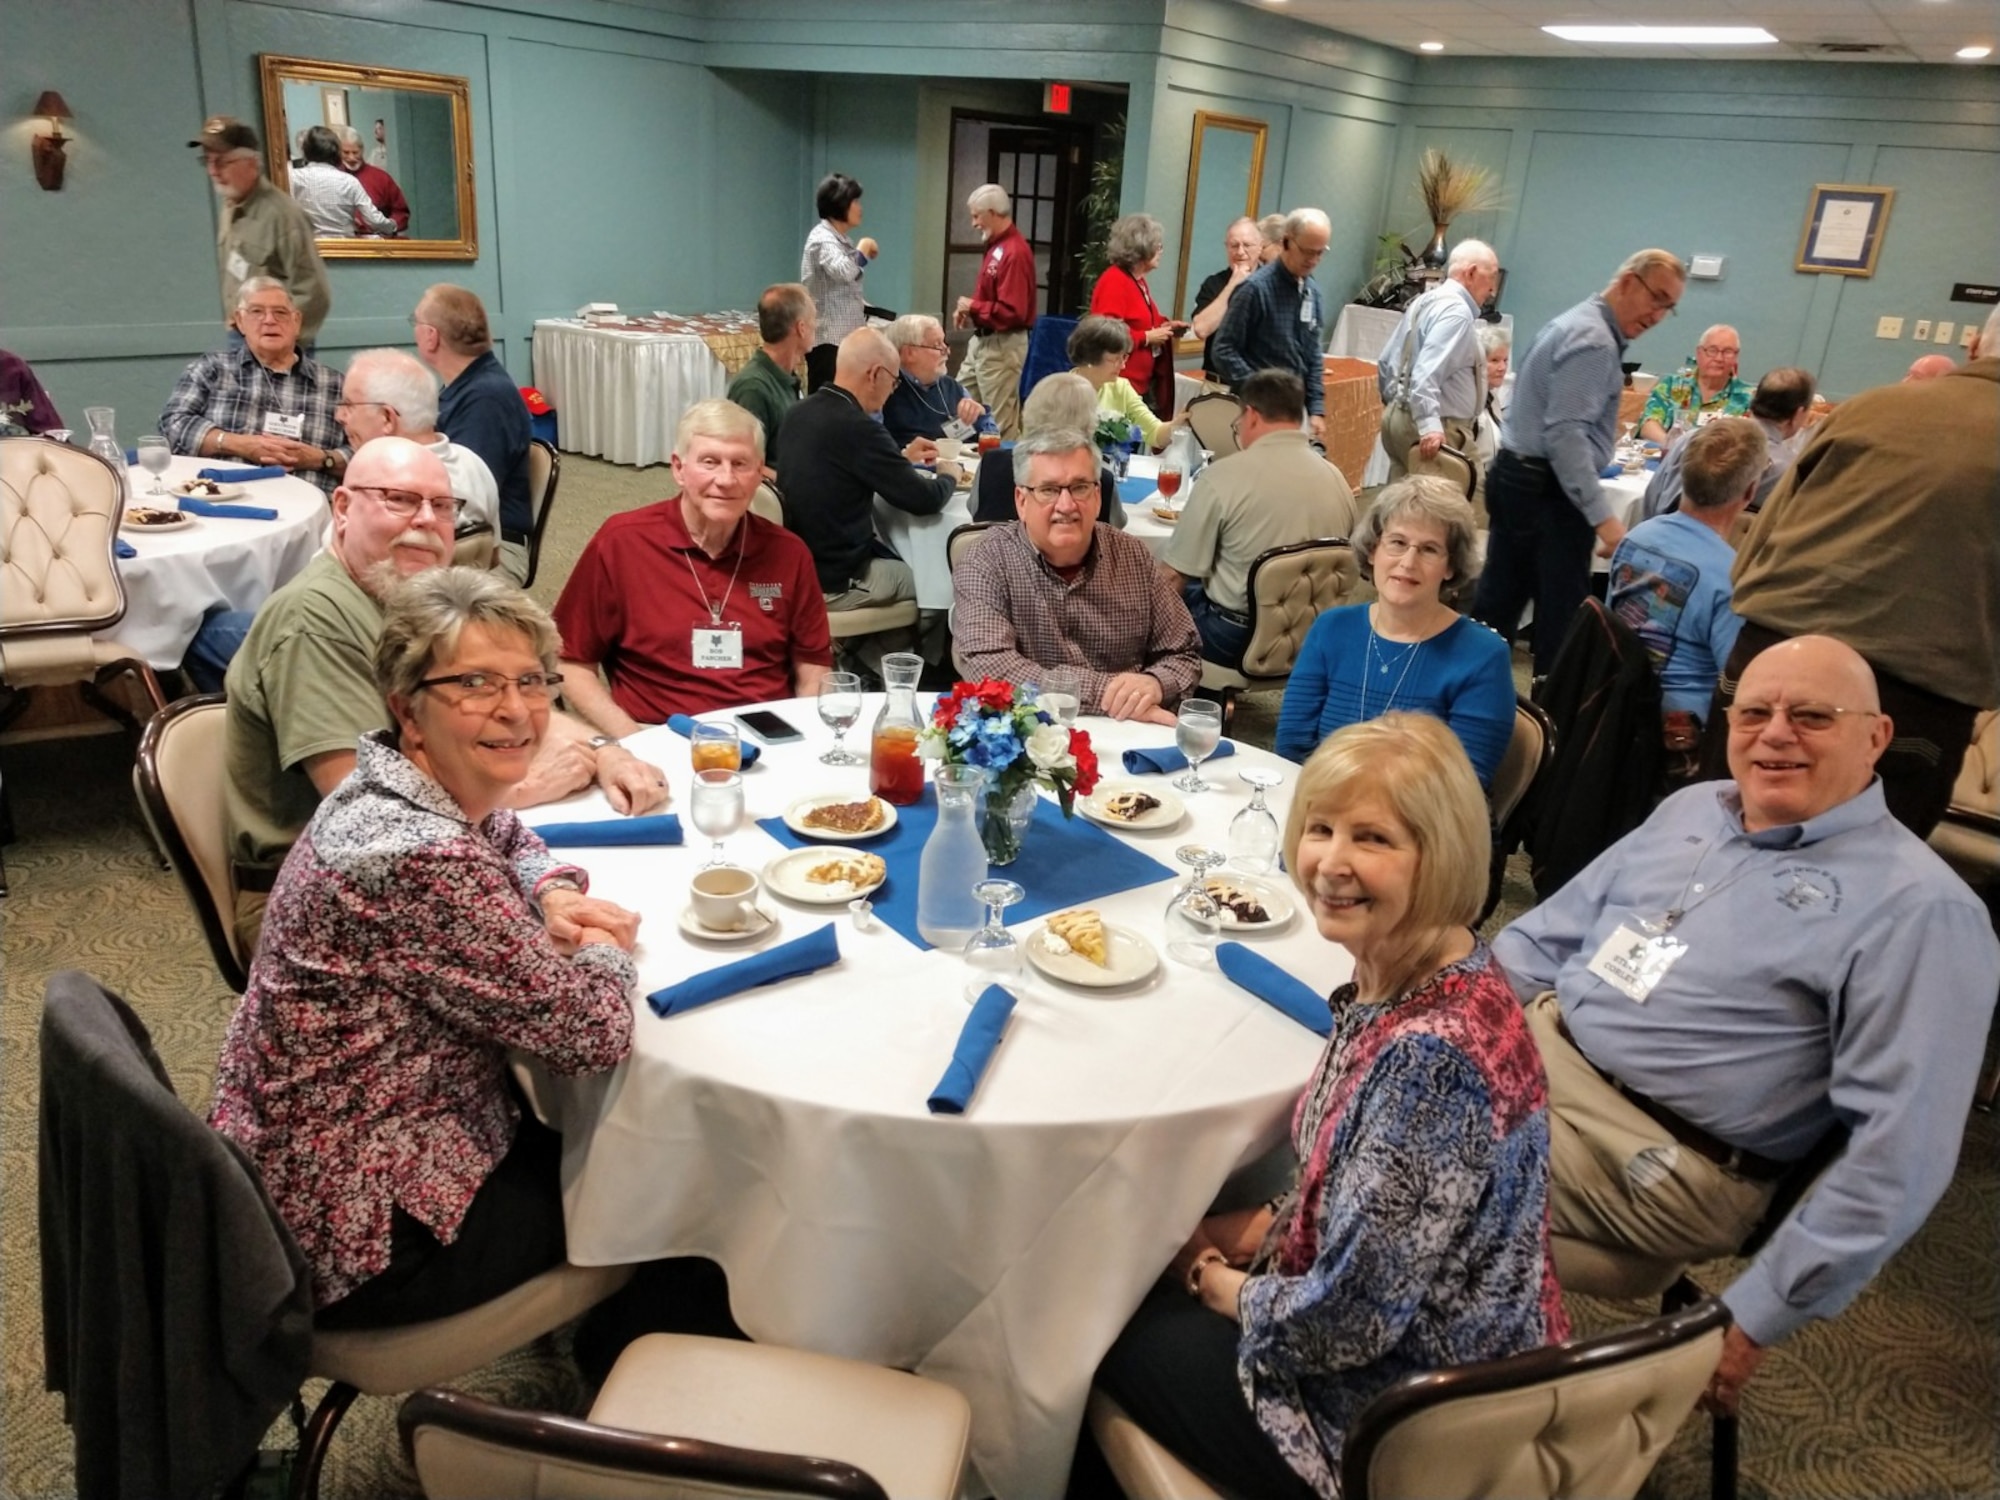 Retirees from the South Carolina Air National Guard gather for their monthly luncheon at the Fort Jackson NCO Club on Feb. 7, 2020.